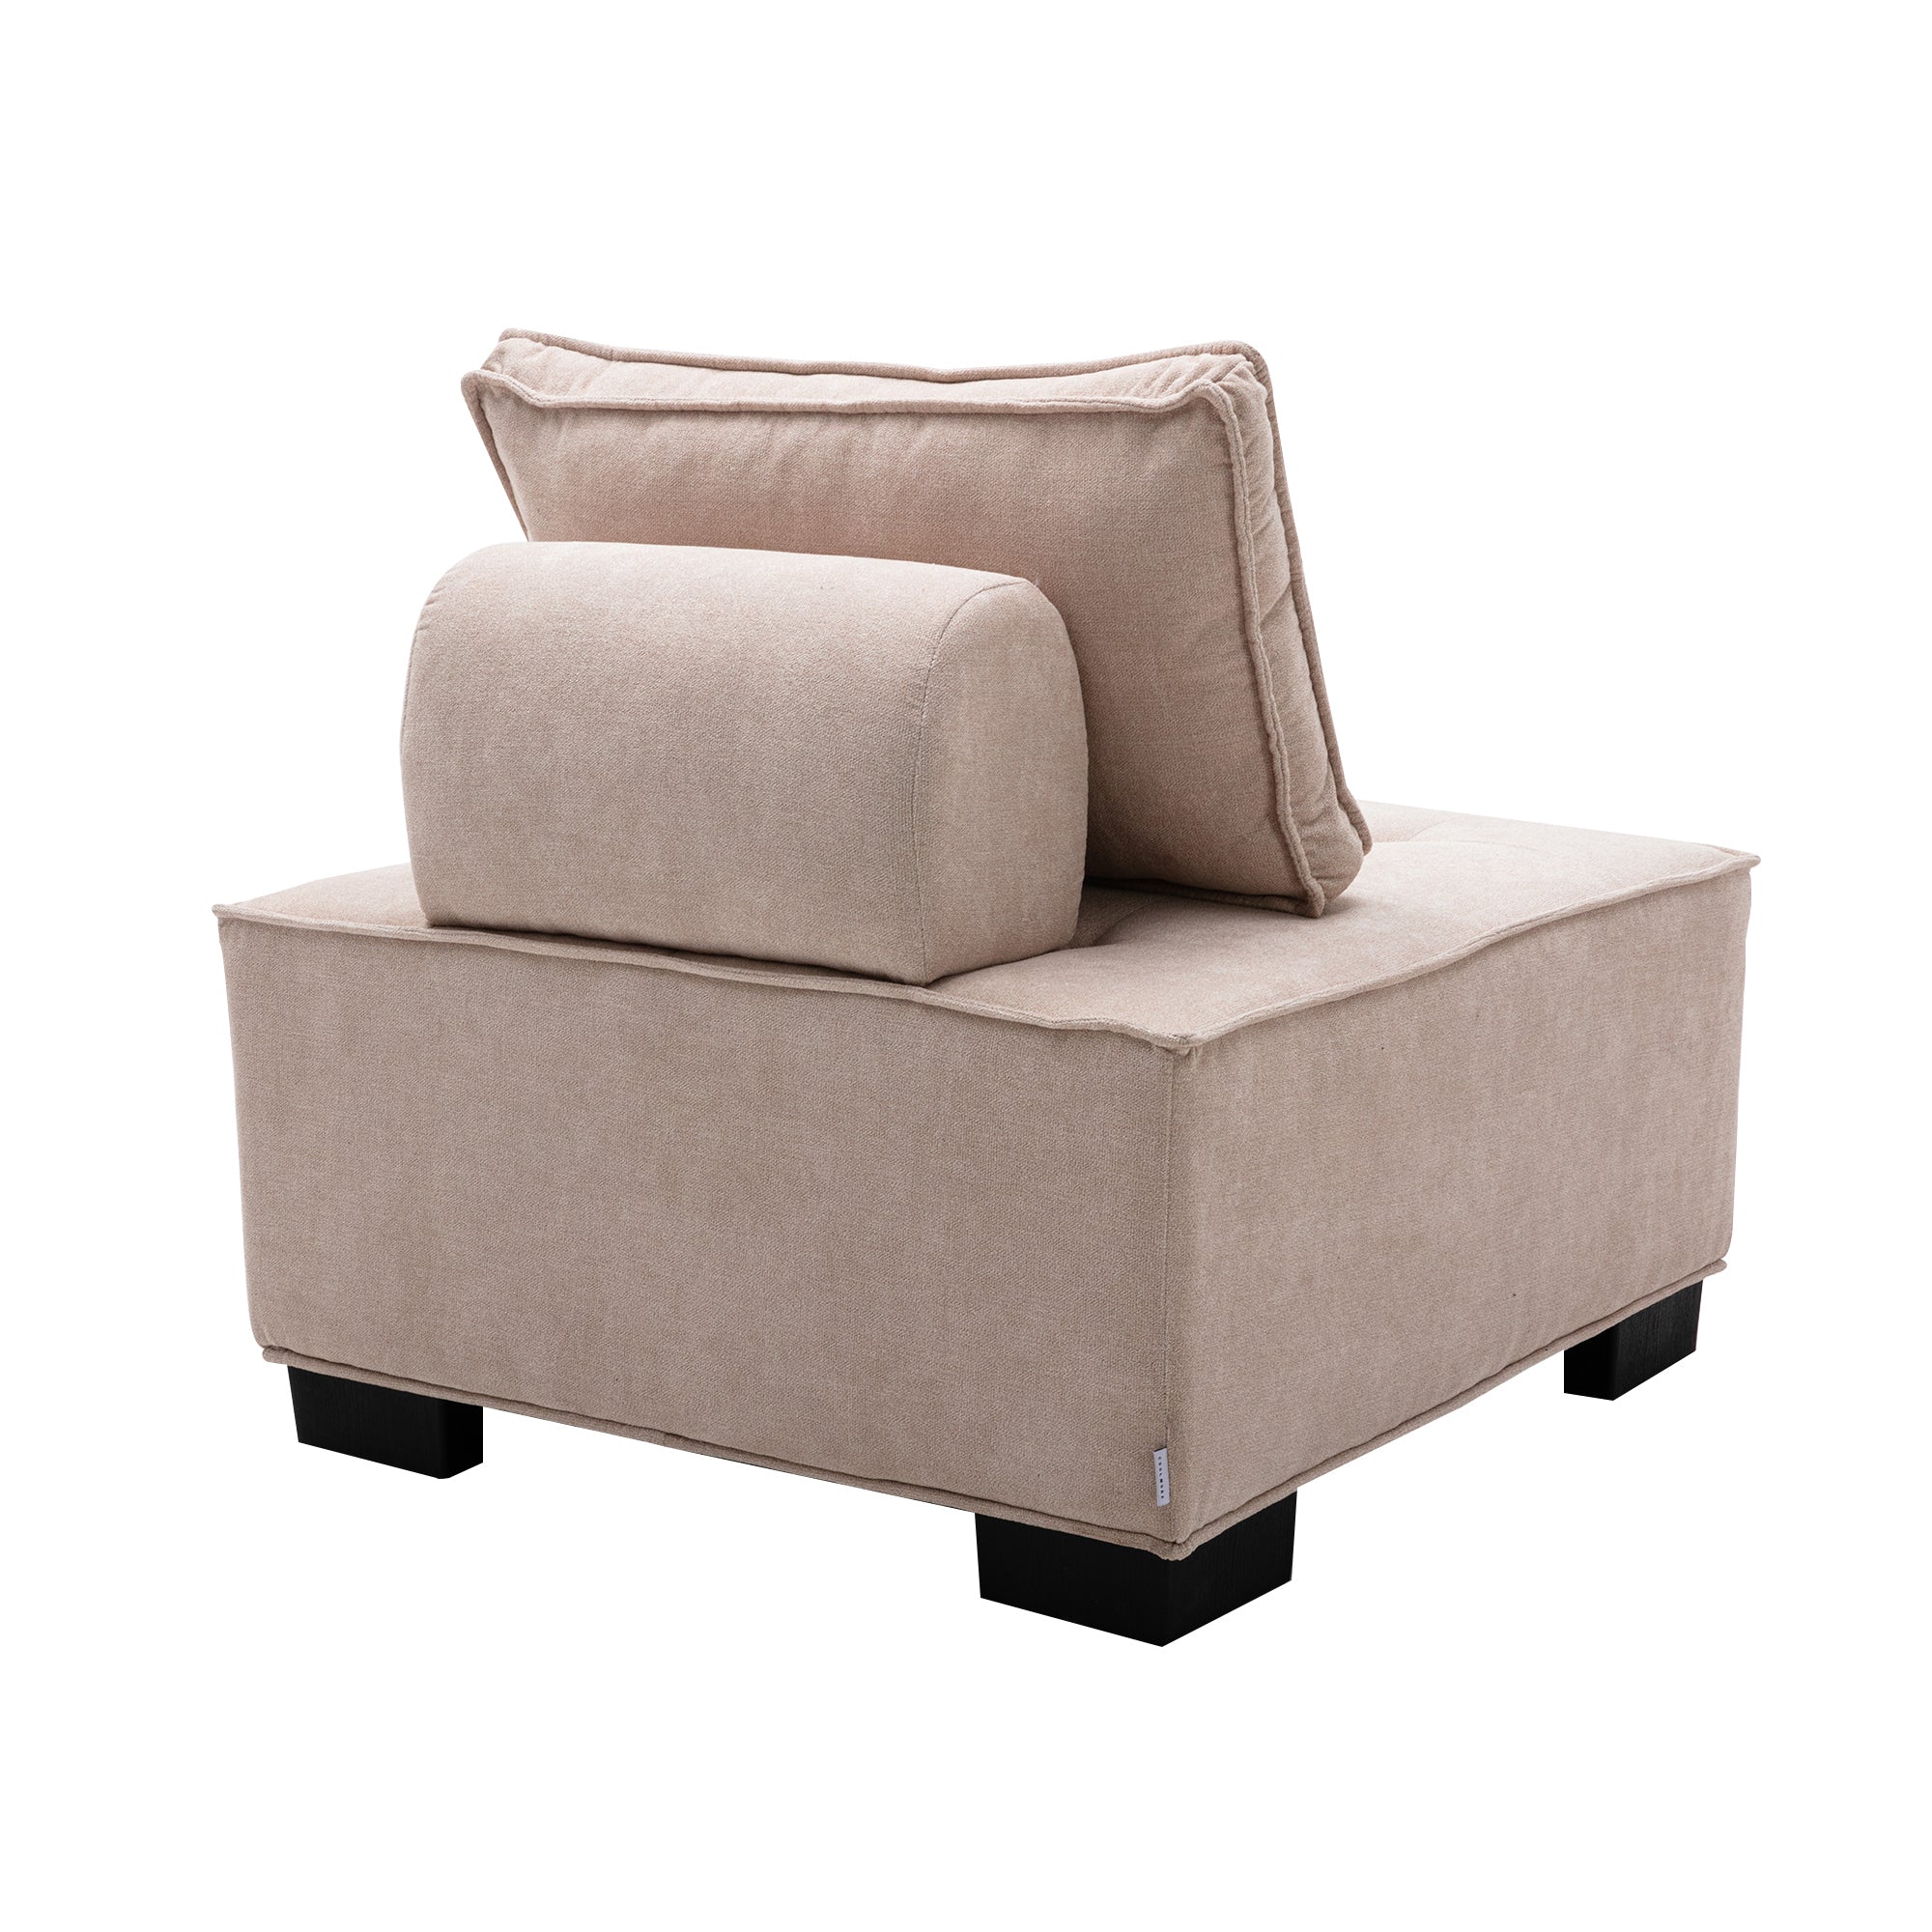 COOMORE LIVING ROOM OTTOMAN LAZY CHAIR beige-polyester